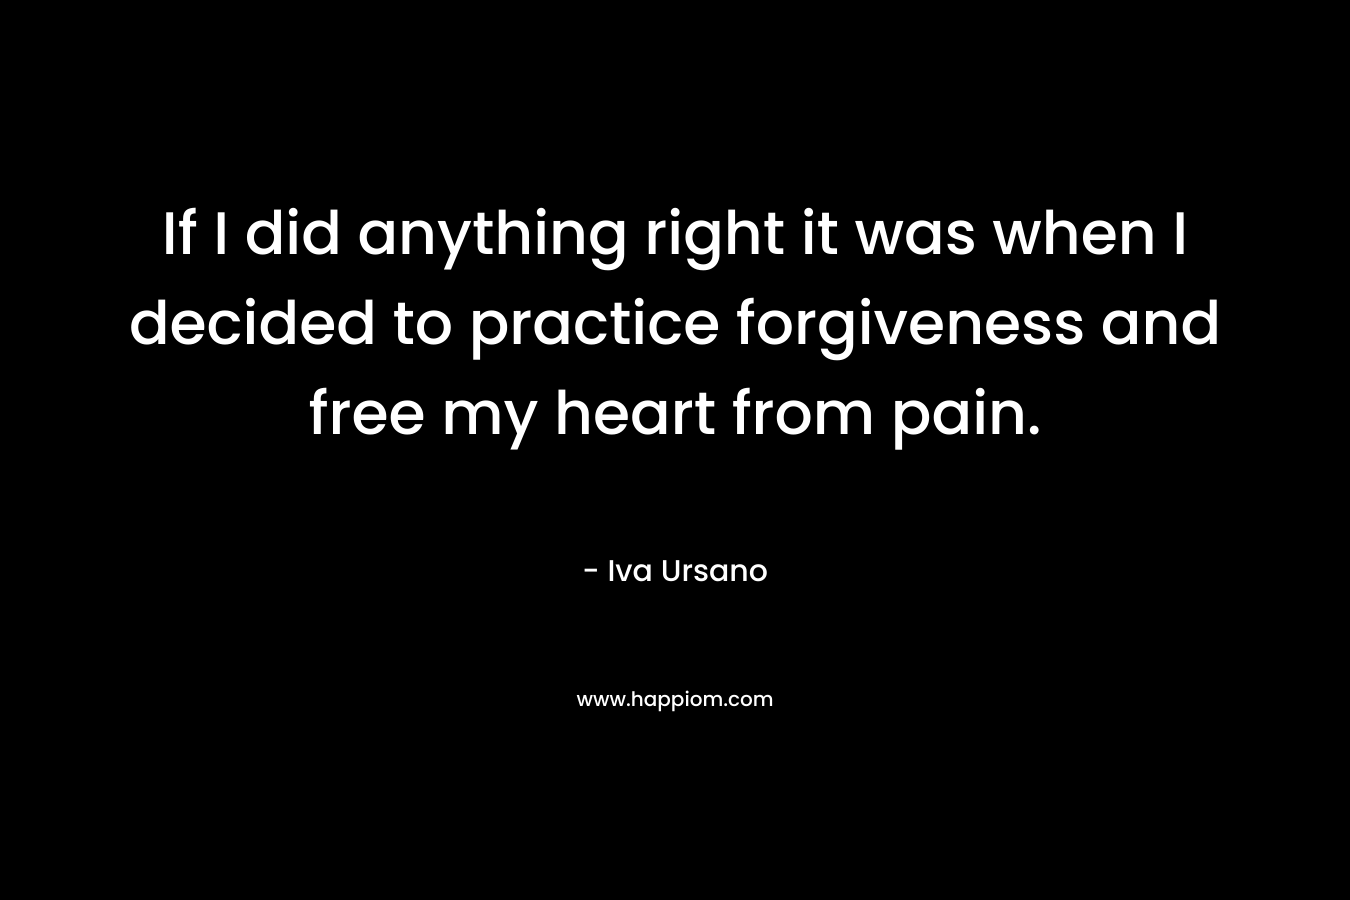 If I did anything right it was when I decided to practice forgiveness and free my heart from pain. – Iva Ursano